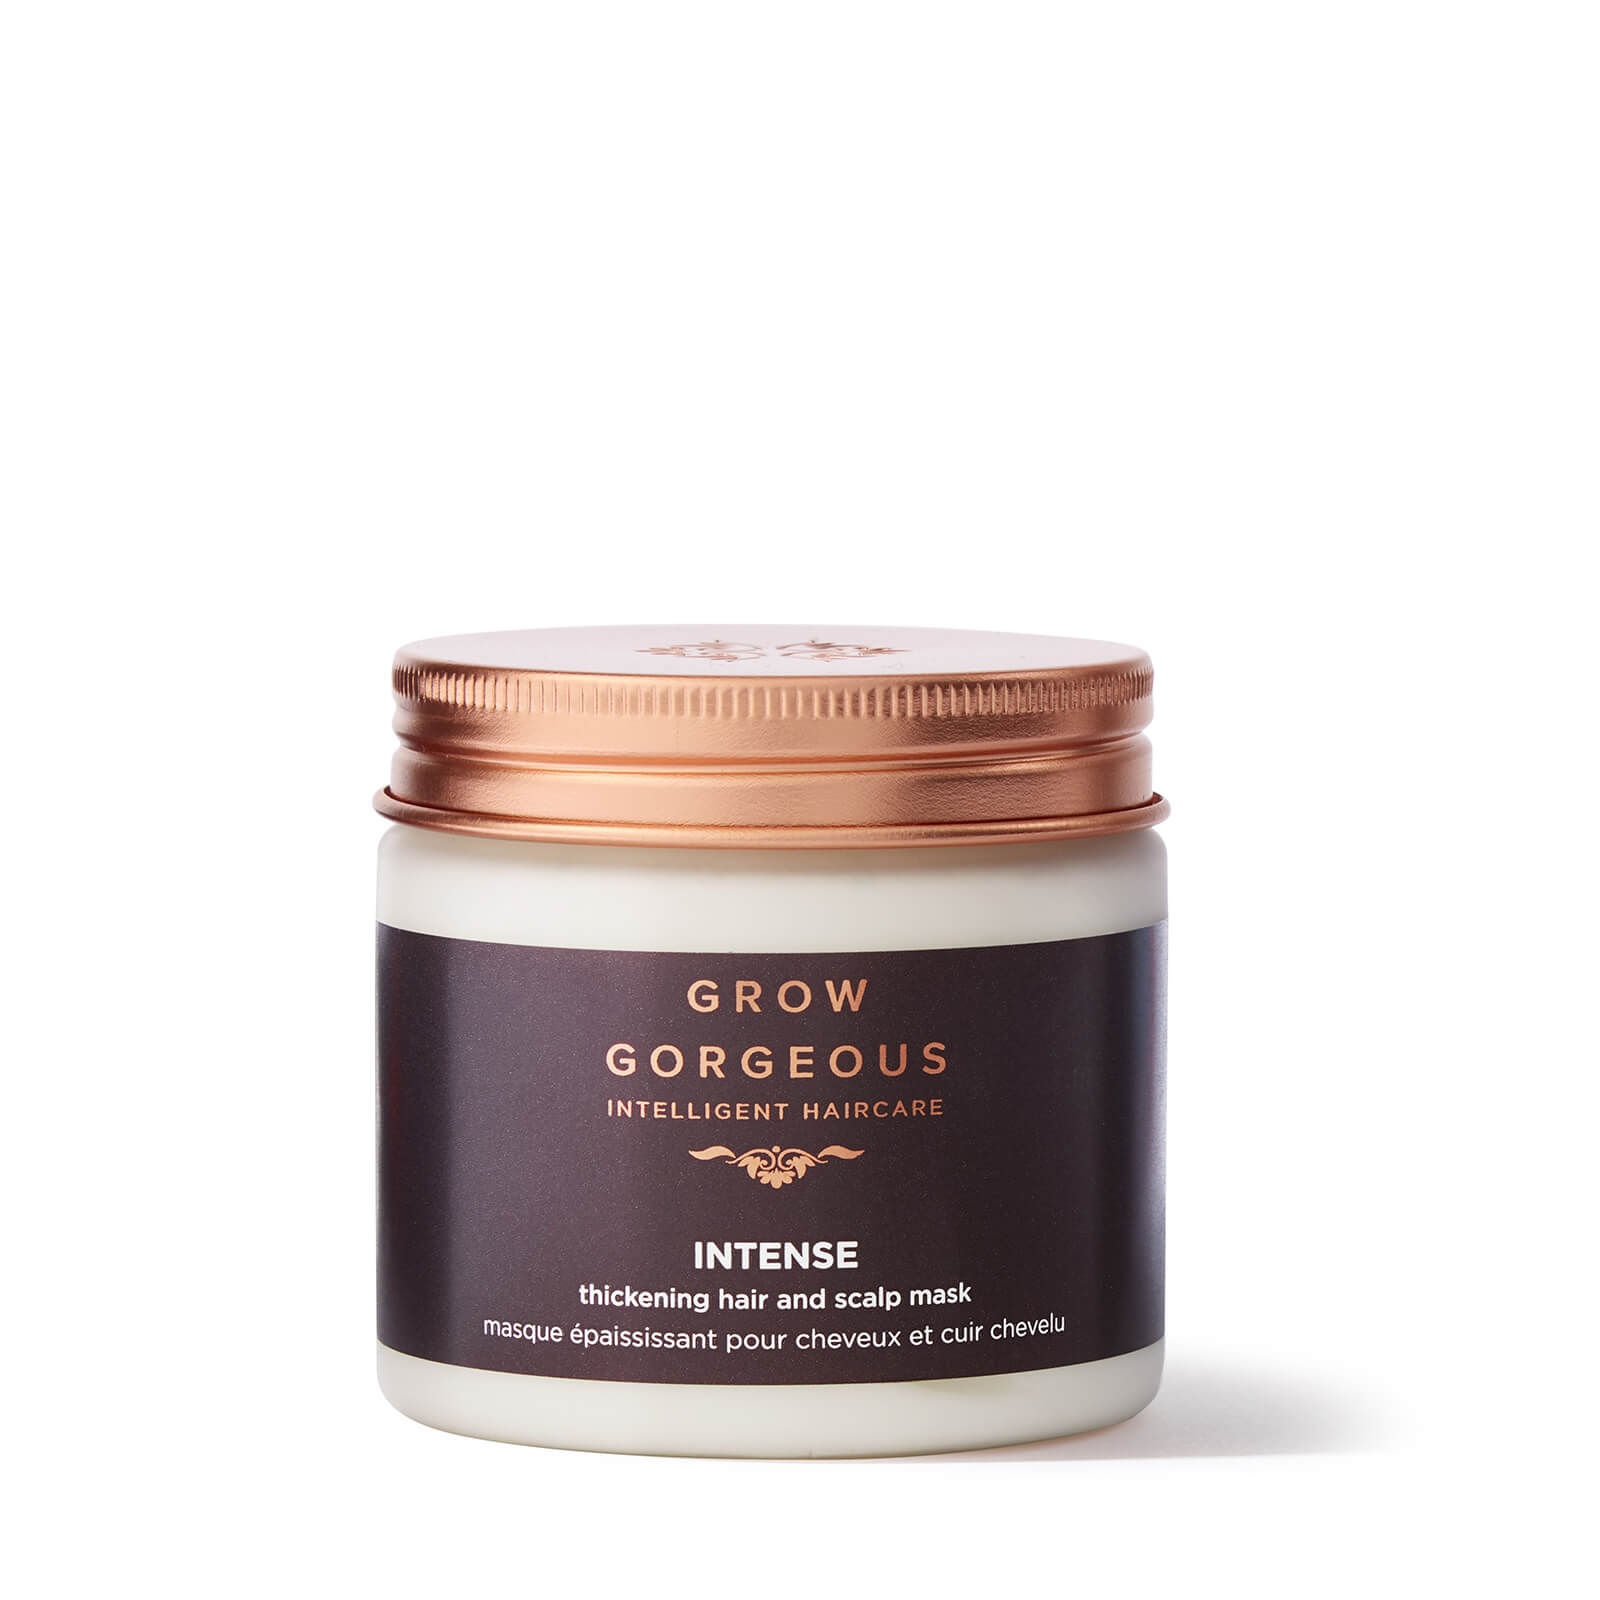 Grow Gorgeous: 3 For 2 and Up to 30% OFF